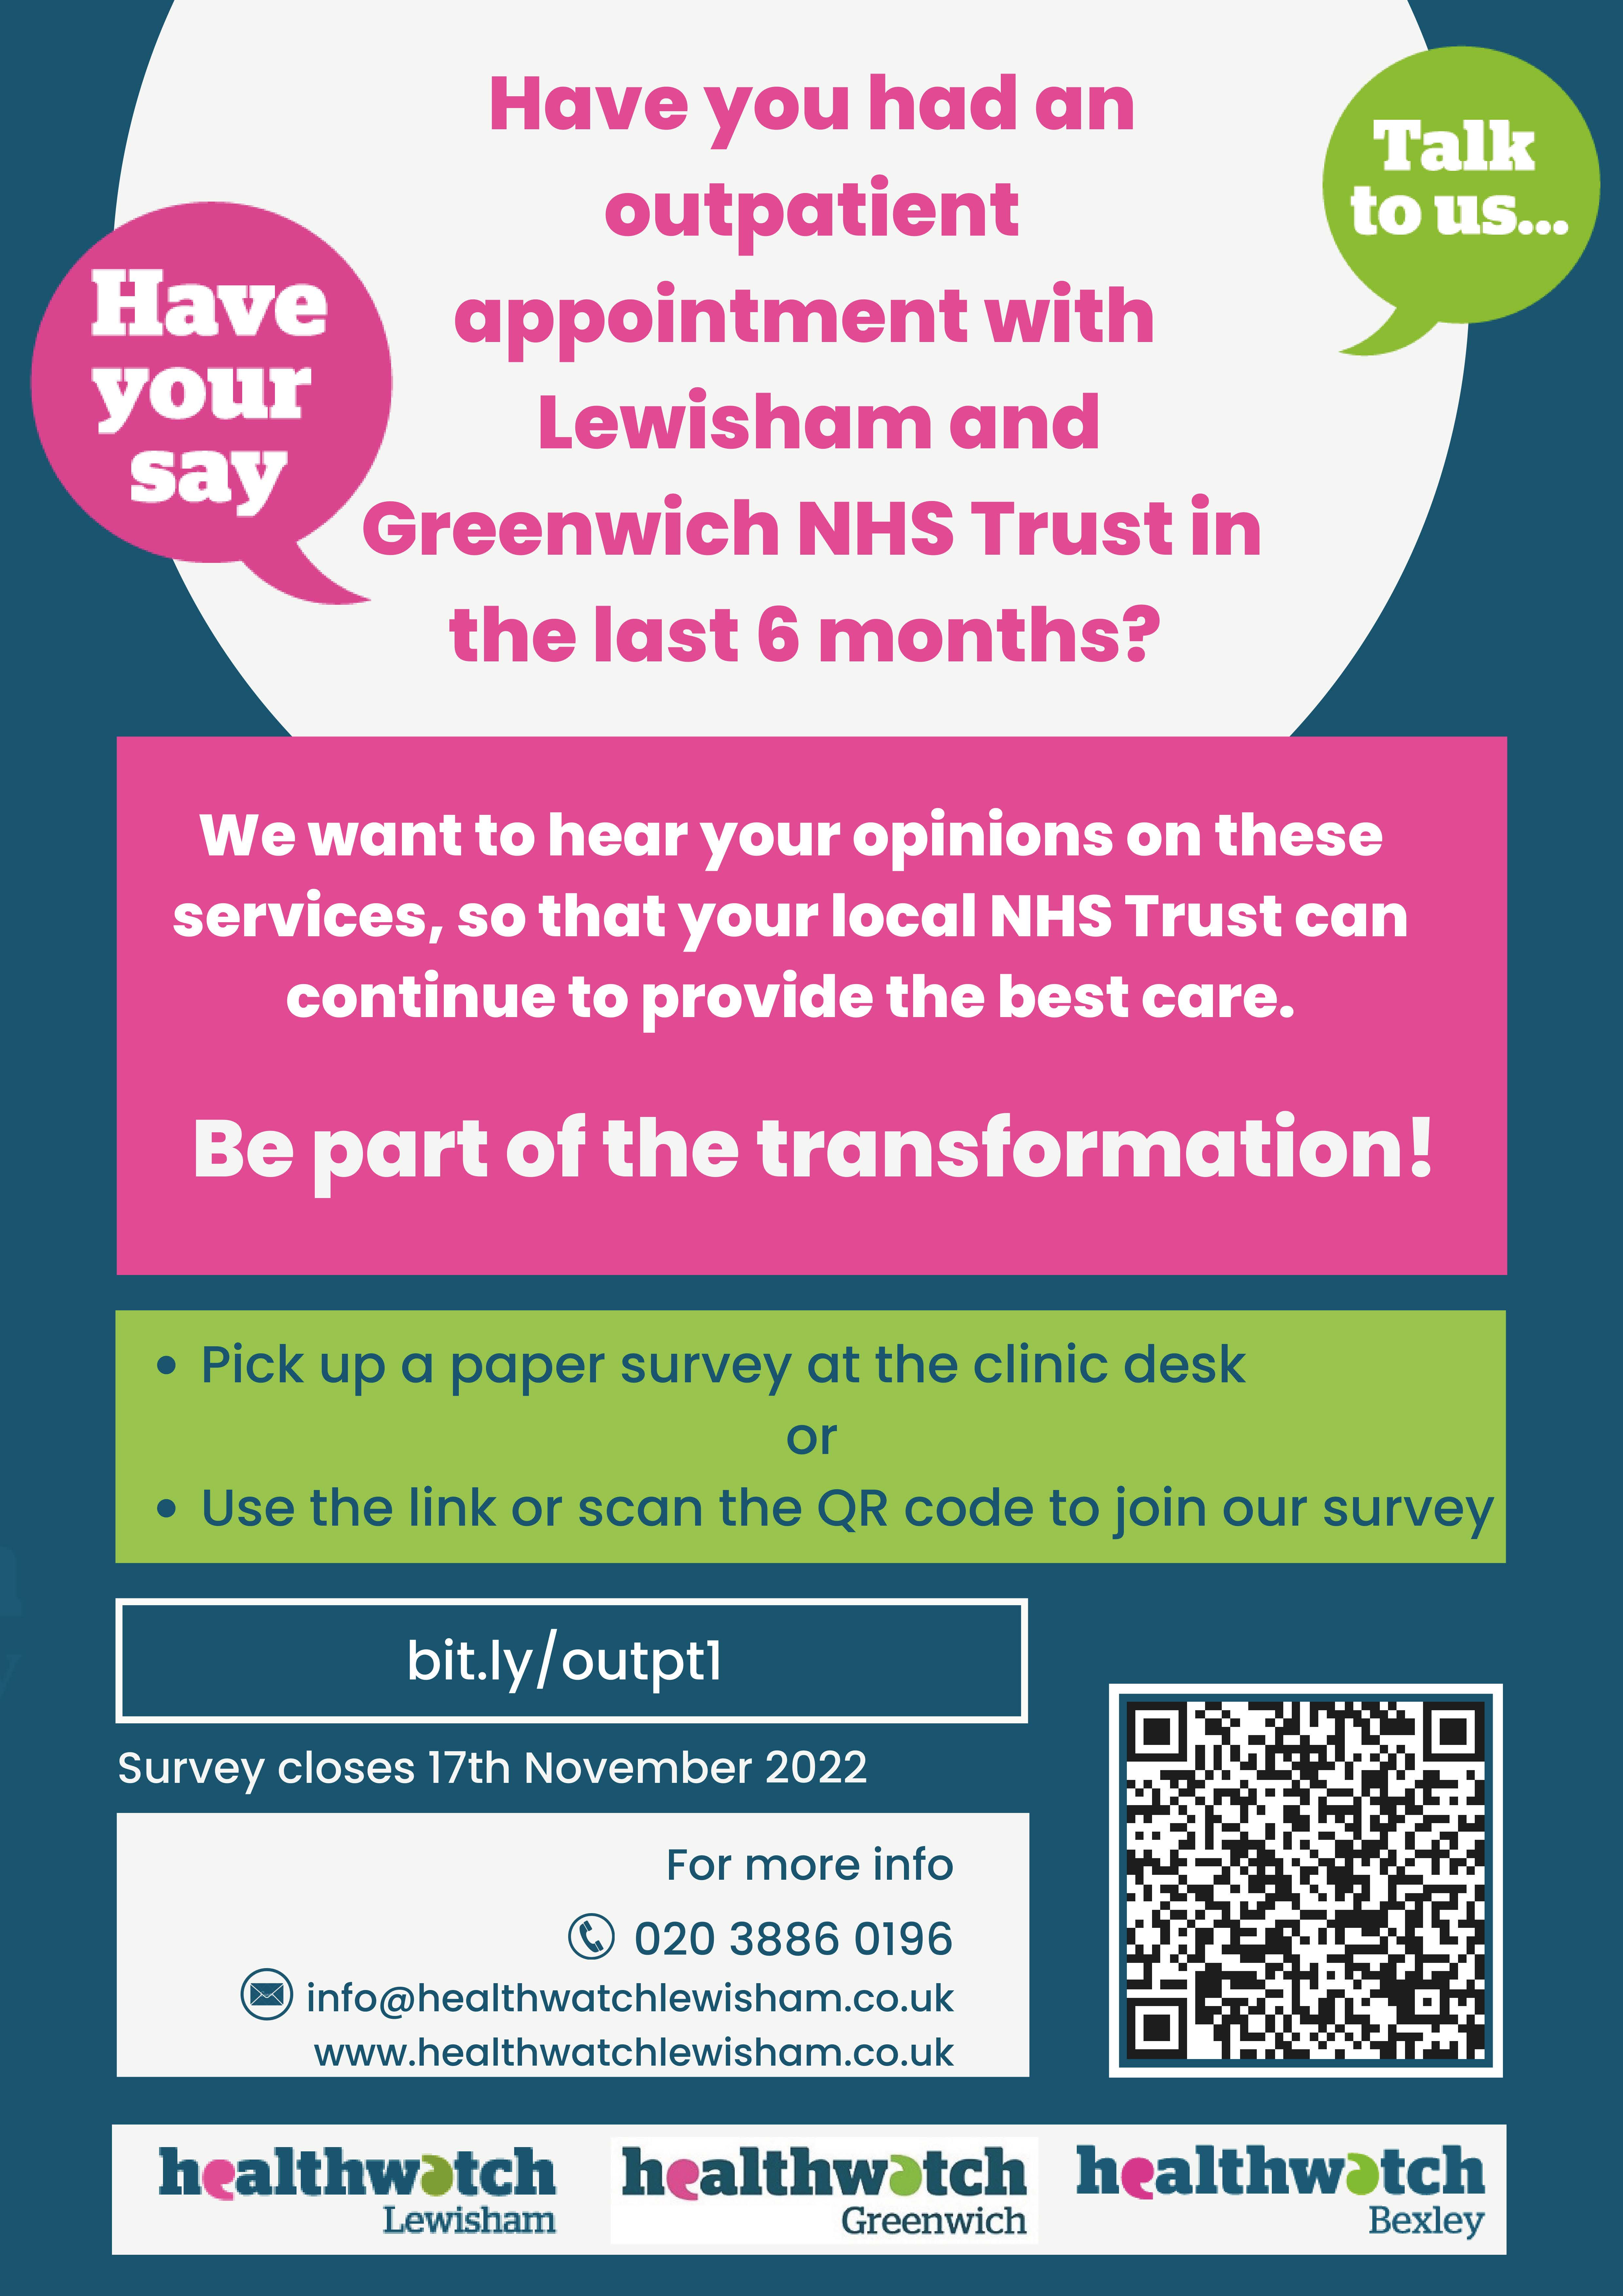 Join our Outpatient appointment